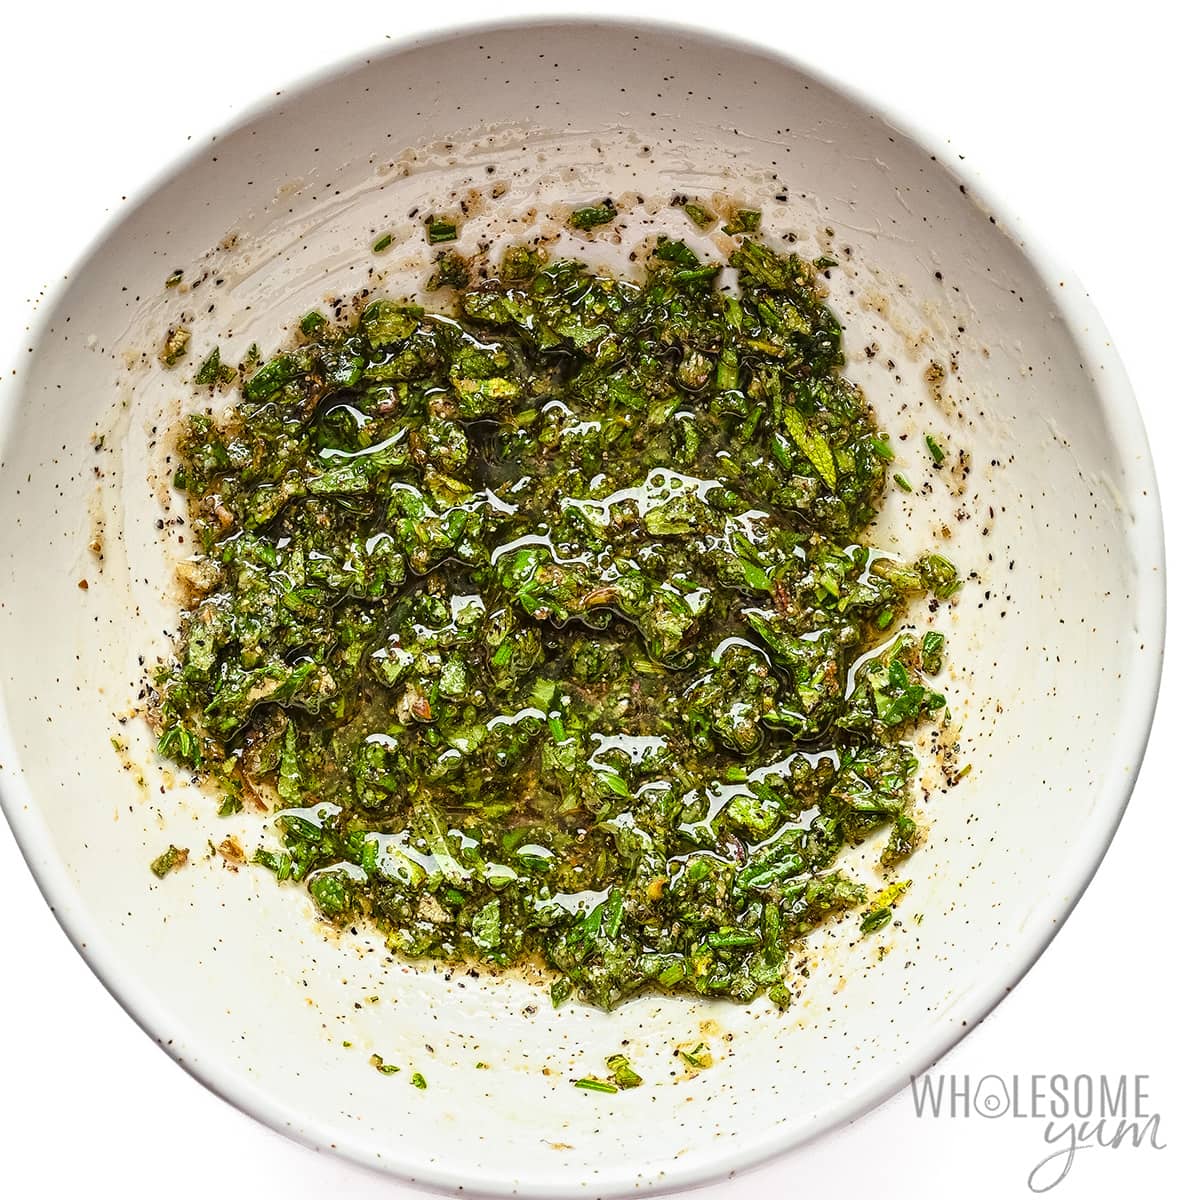 Mix together the olive oil, herbs and spices in a bowl.